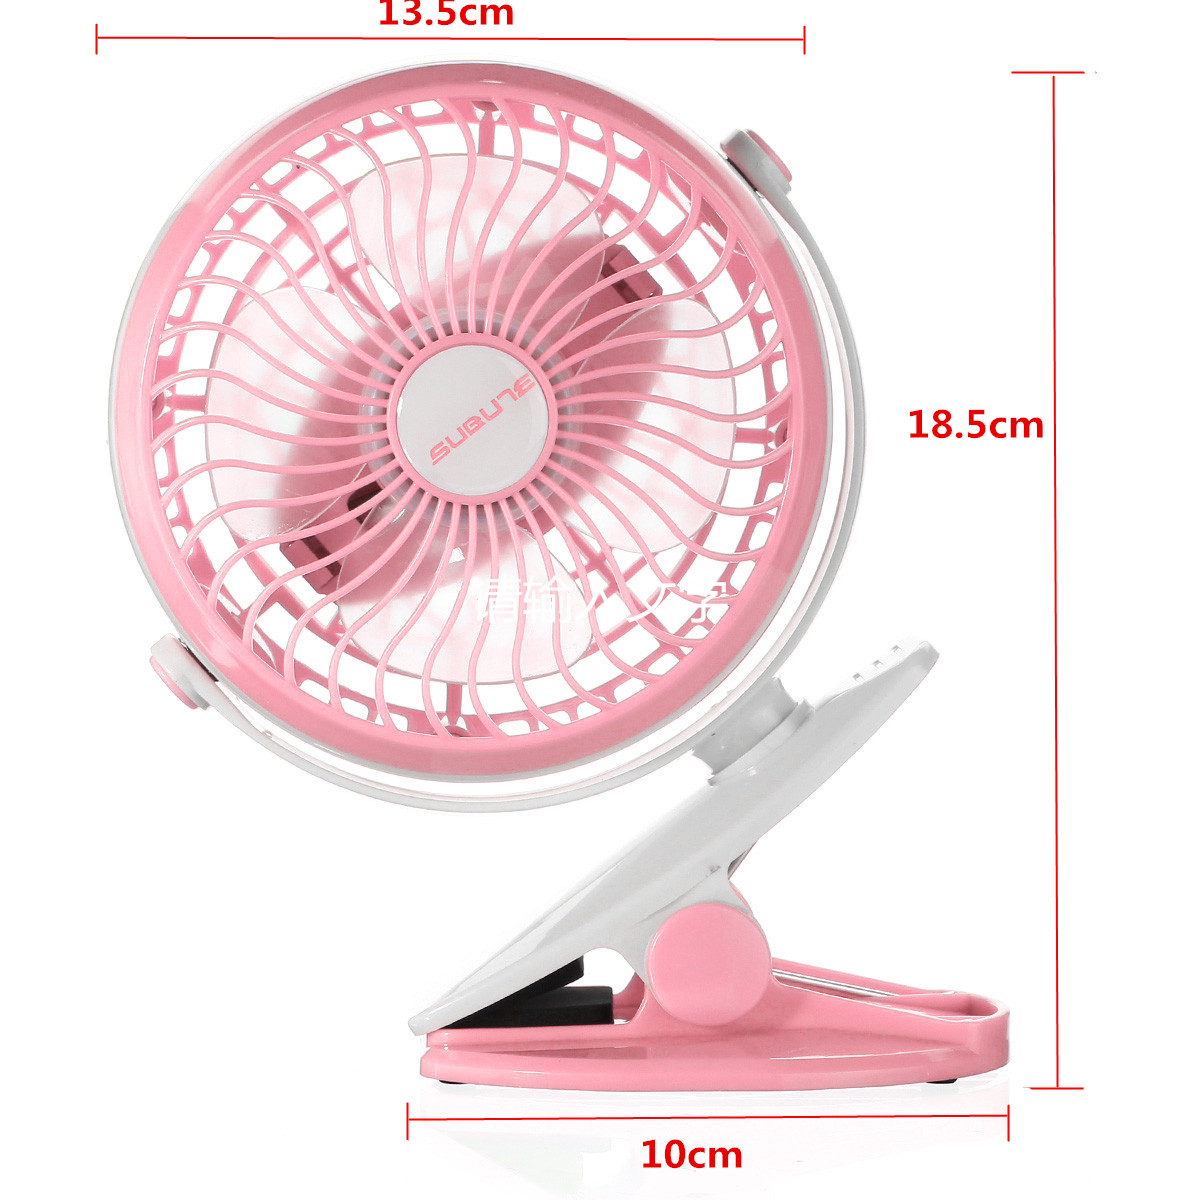 360ordm-Clip-On-Portable-Mini-USB-Baby-Carriage-Camping-Outdoor-Desktop-Office-Fan-Cooler-1154208